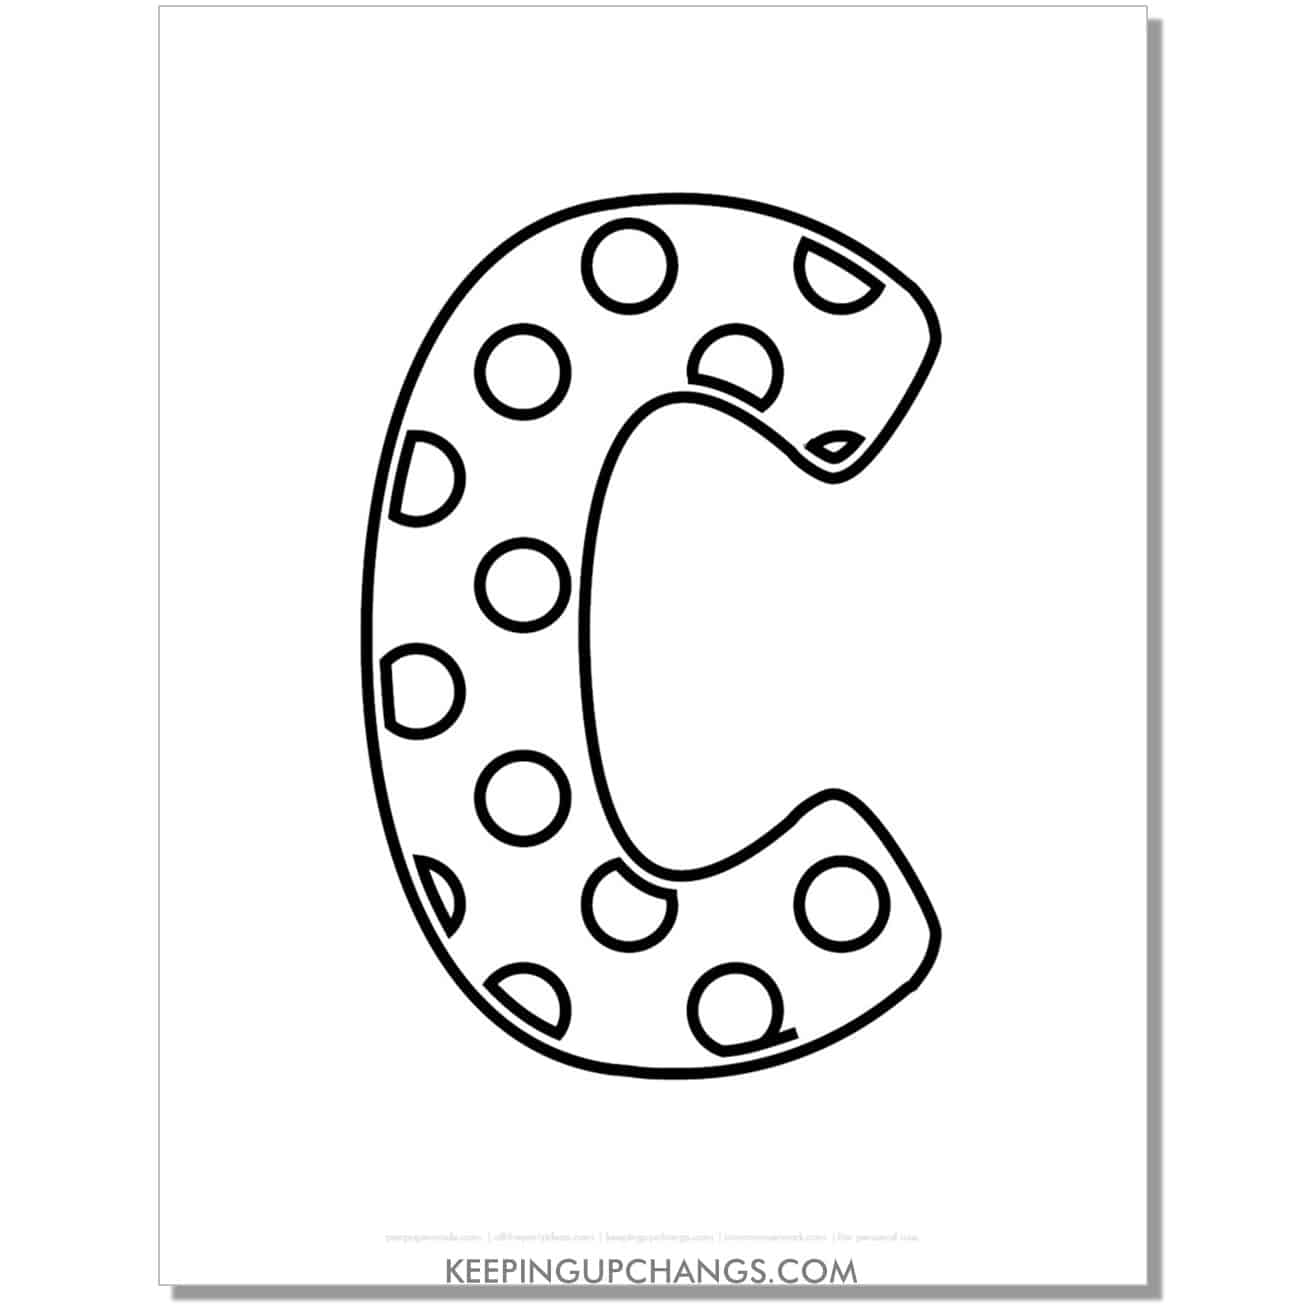 free alphabet letter c coloring page with polka dots for toddlers, preschool, kindergarten.